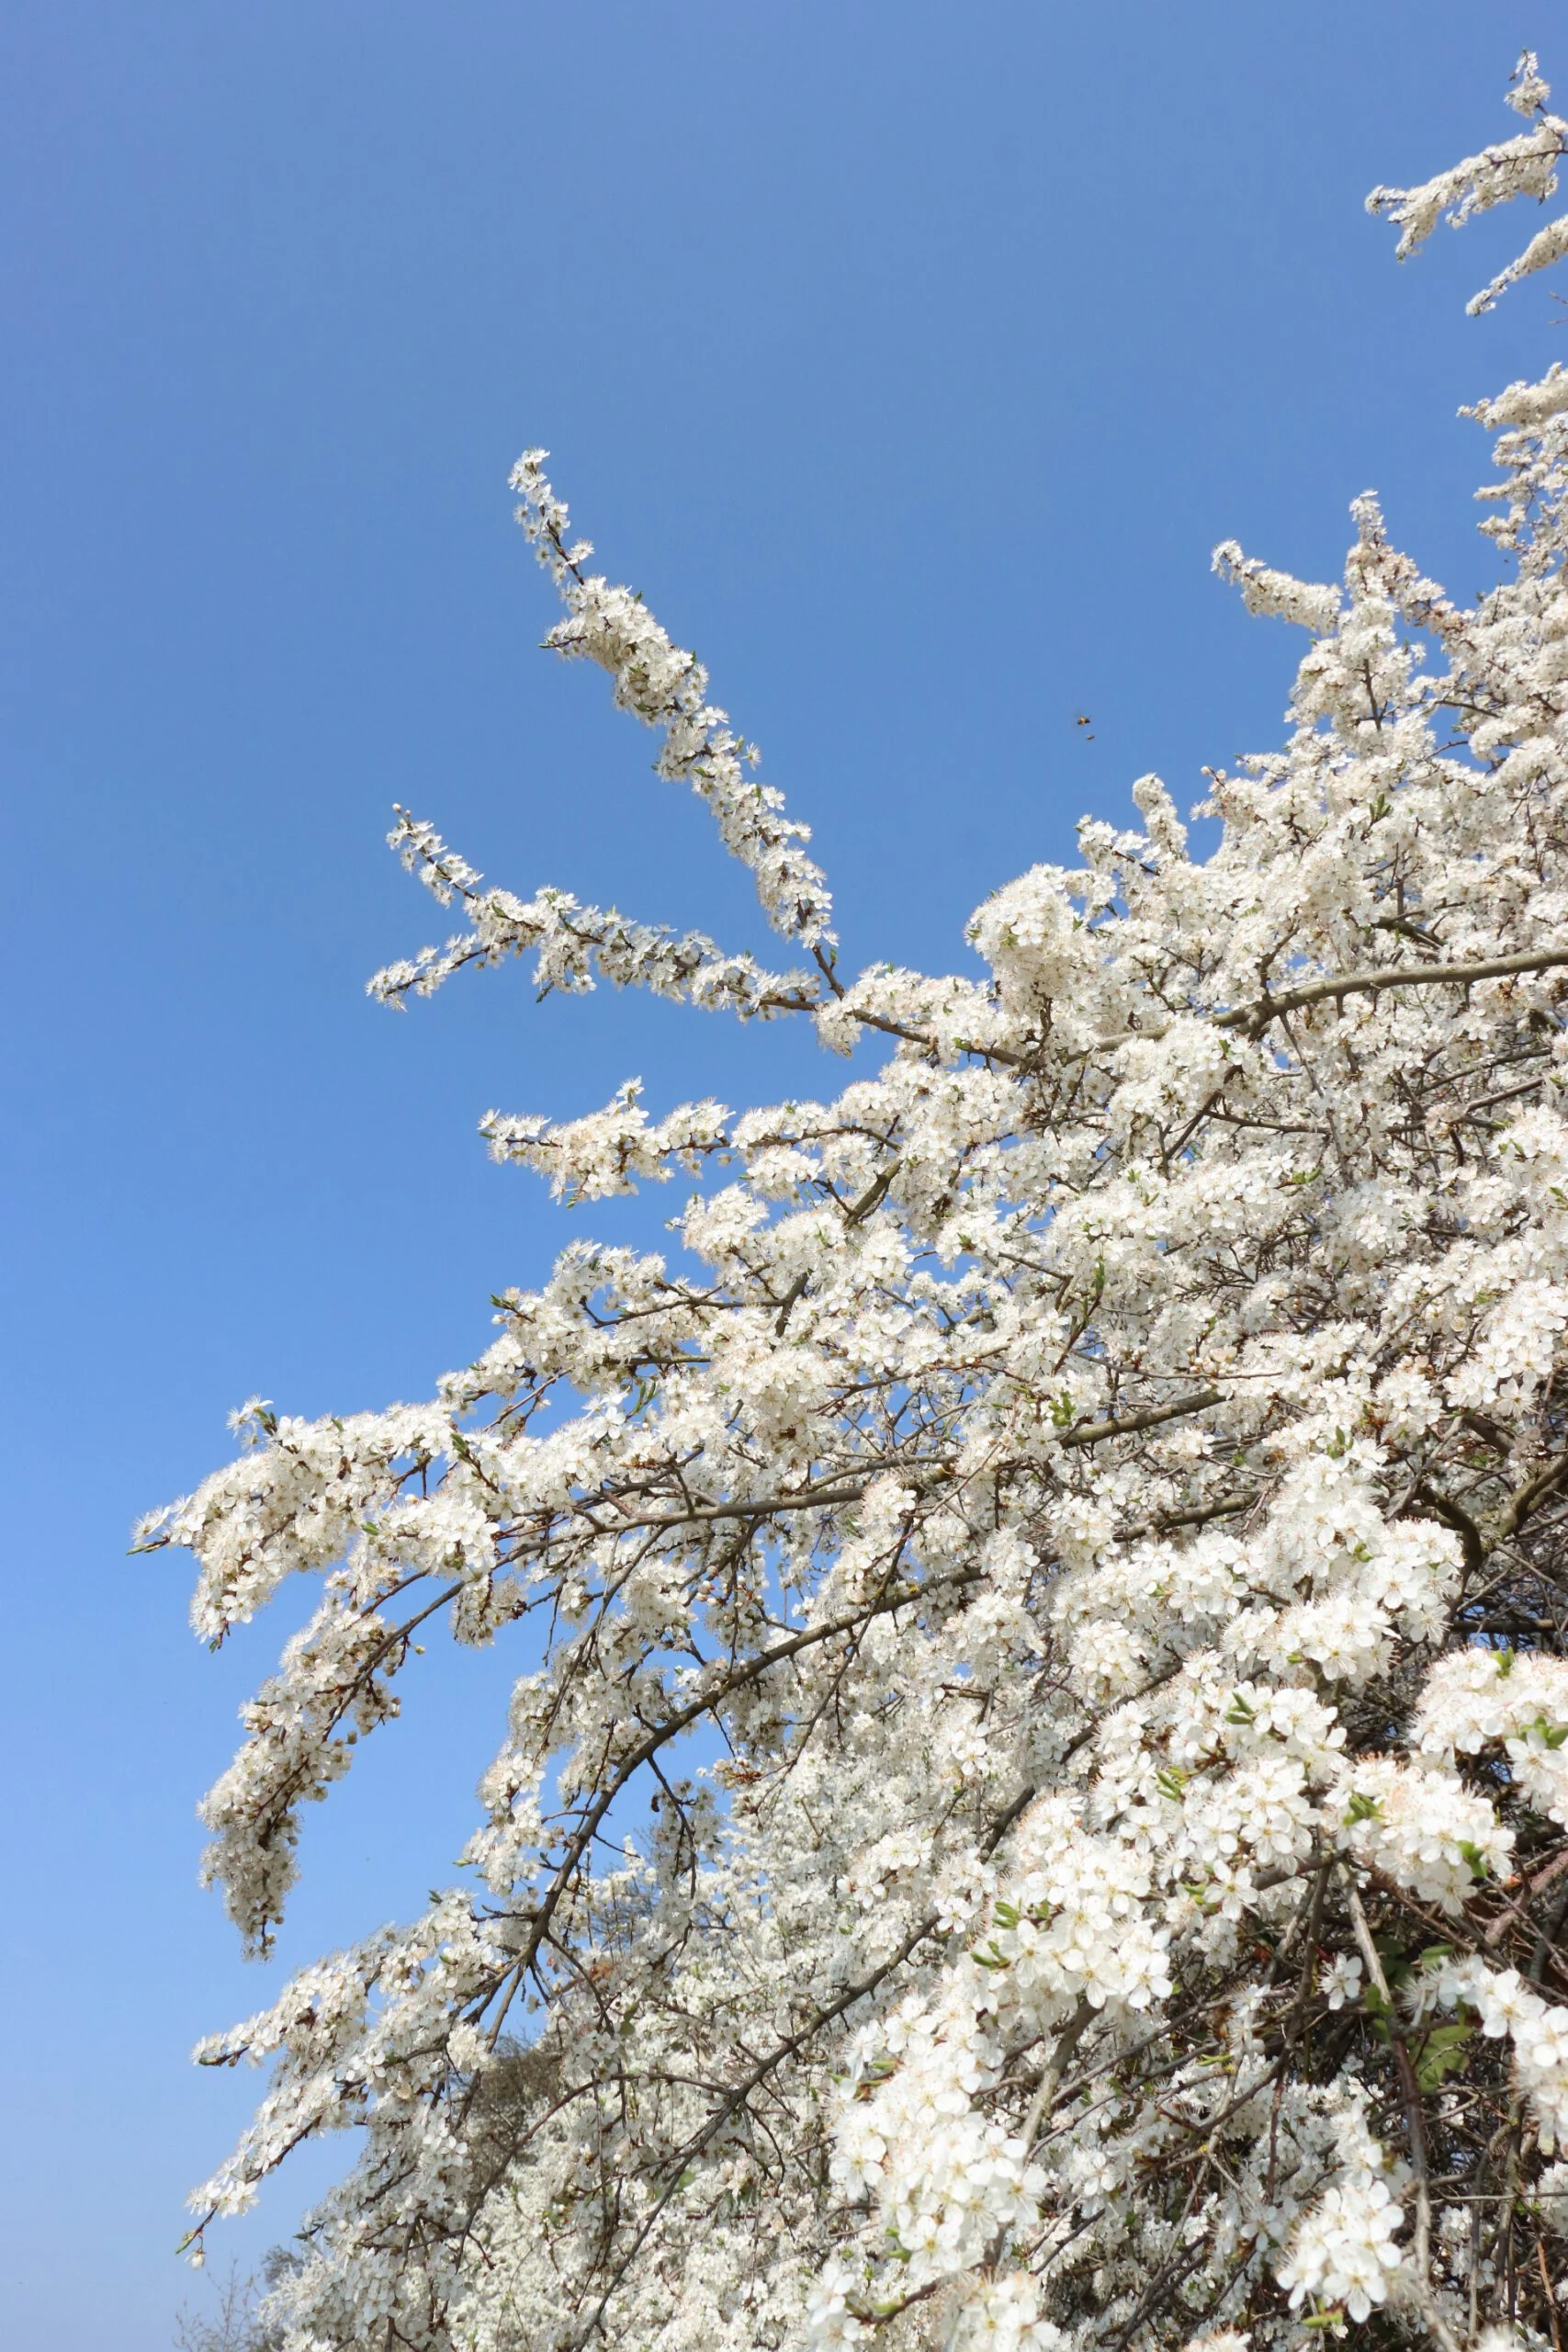 Left: blue sky, right: inflorescences on branches with white flowers. The branches have a dark grey colour. Some of the branches hang down slightly.